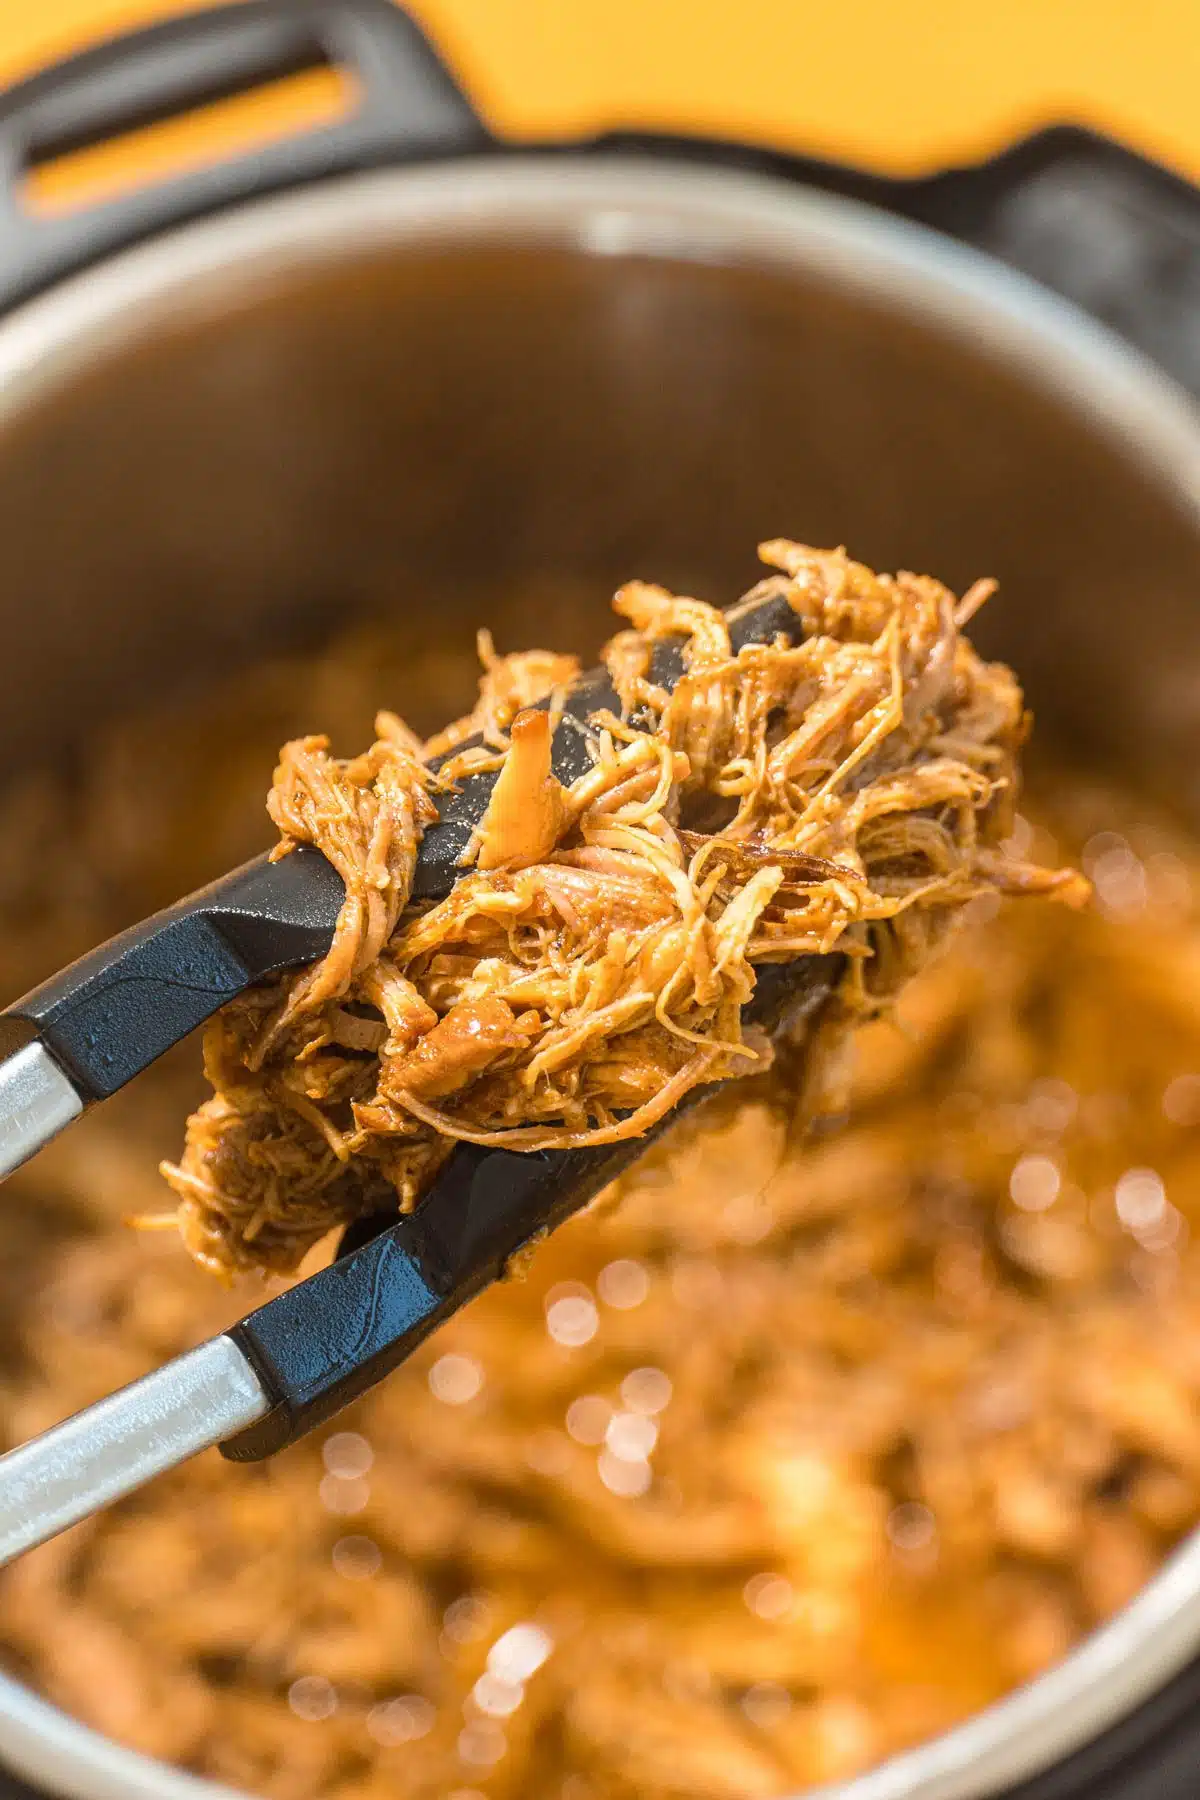 A pair of tongs lifting BBQ pulled pork out of an Instant Pot.